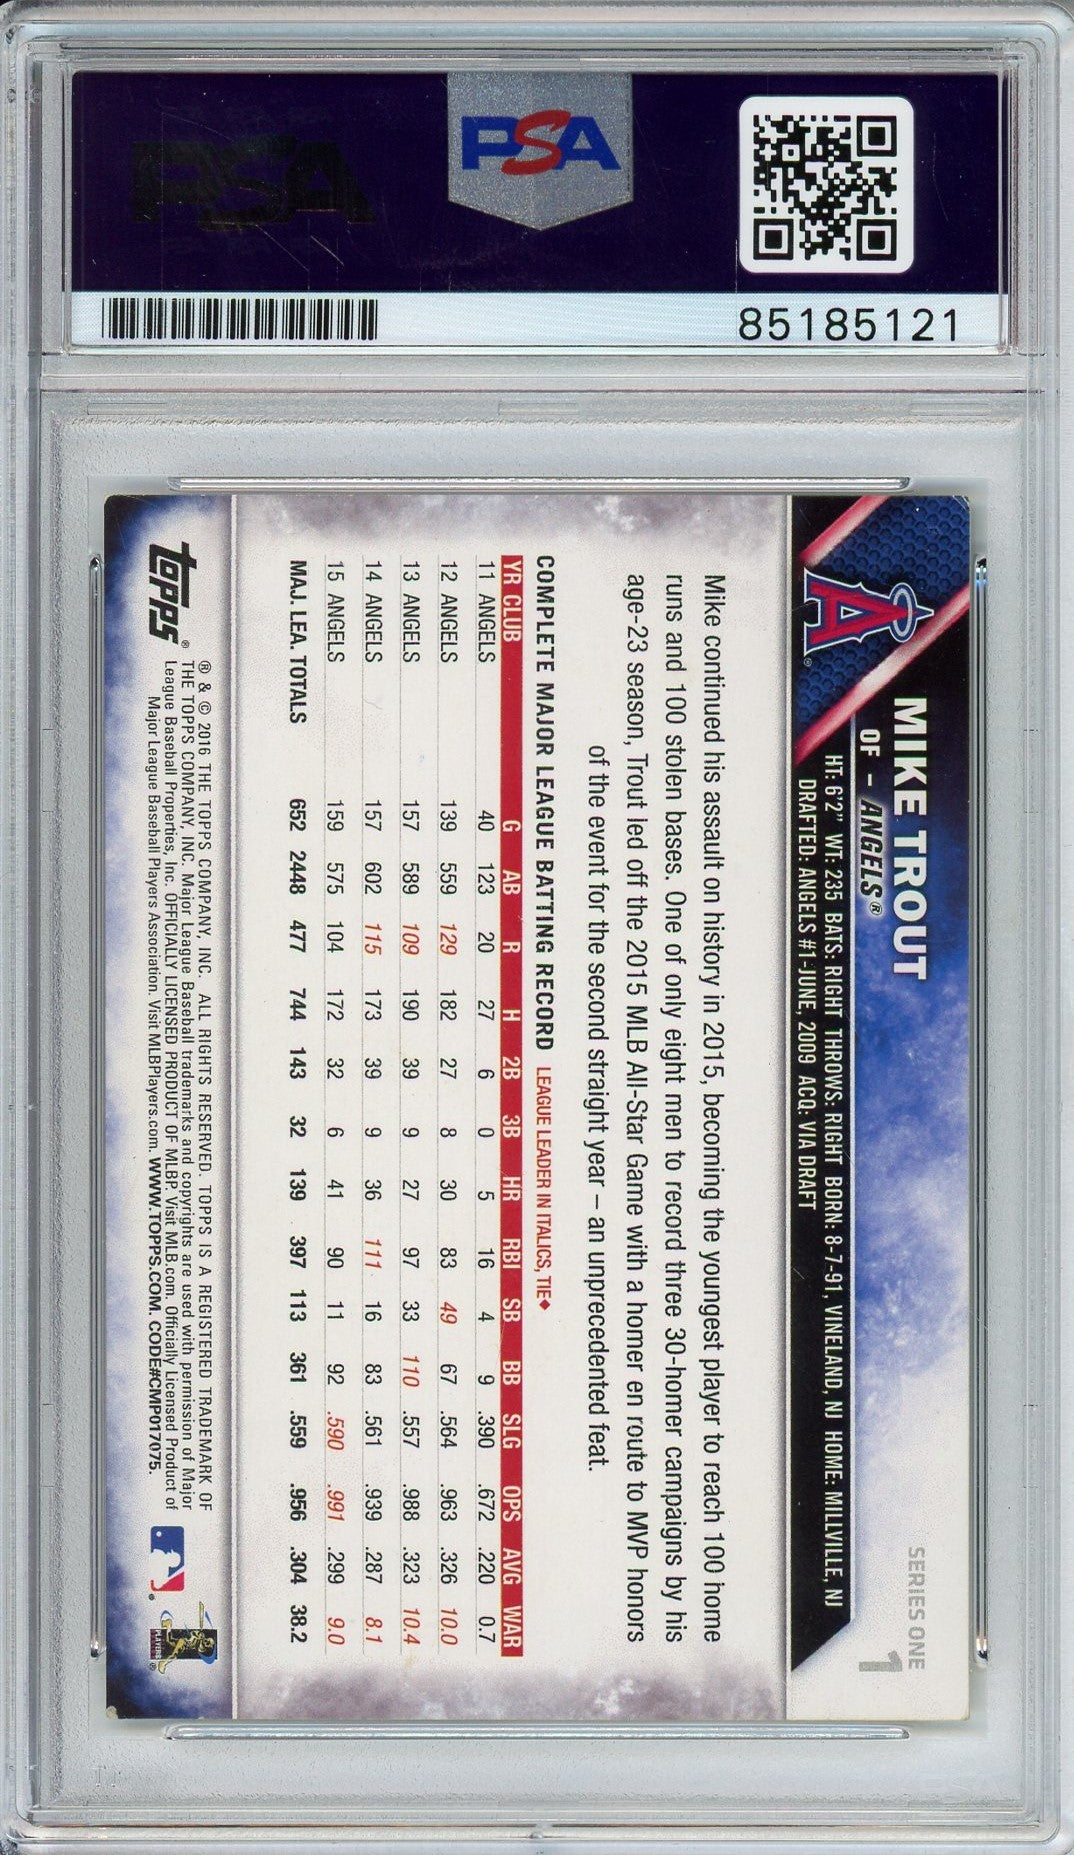 2016 TOPPS SERIES 1 MIKE TROUT AUTO CARD PSA DNA (5121)